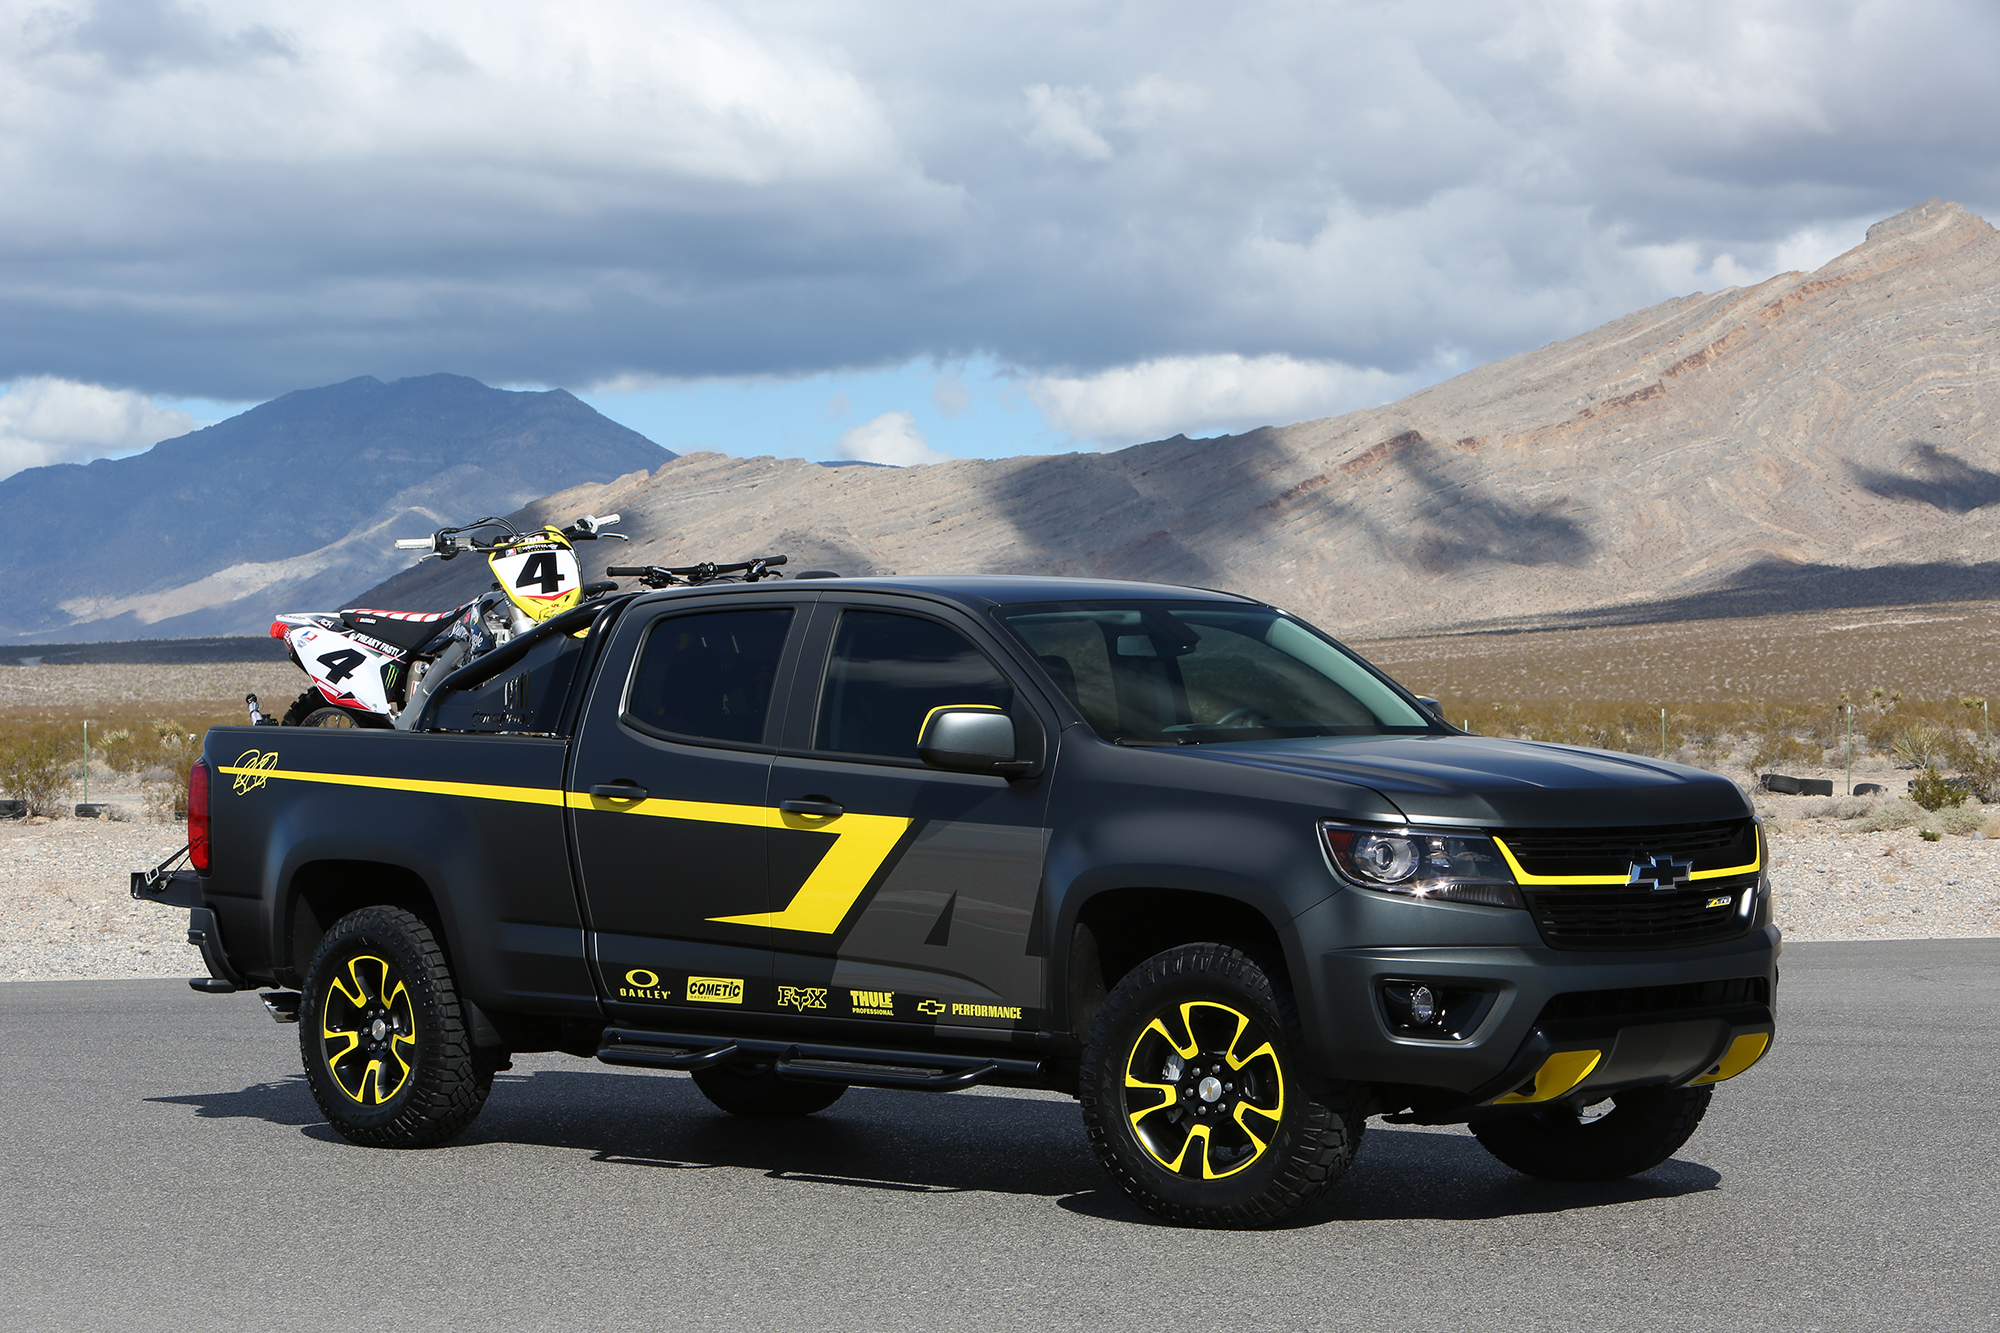 Chevy Doubles Down On 2015 Colorado At SEMA: Video